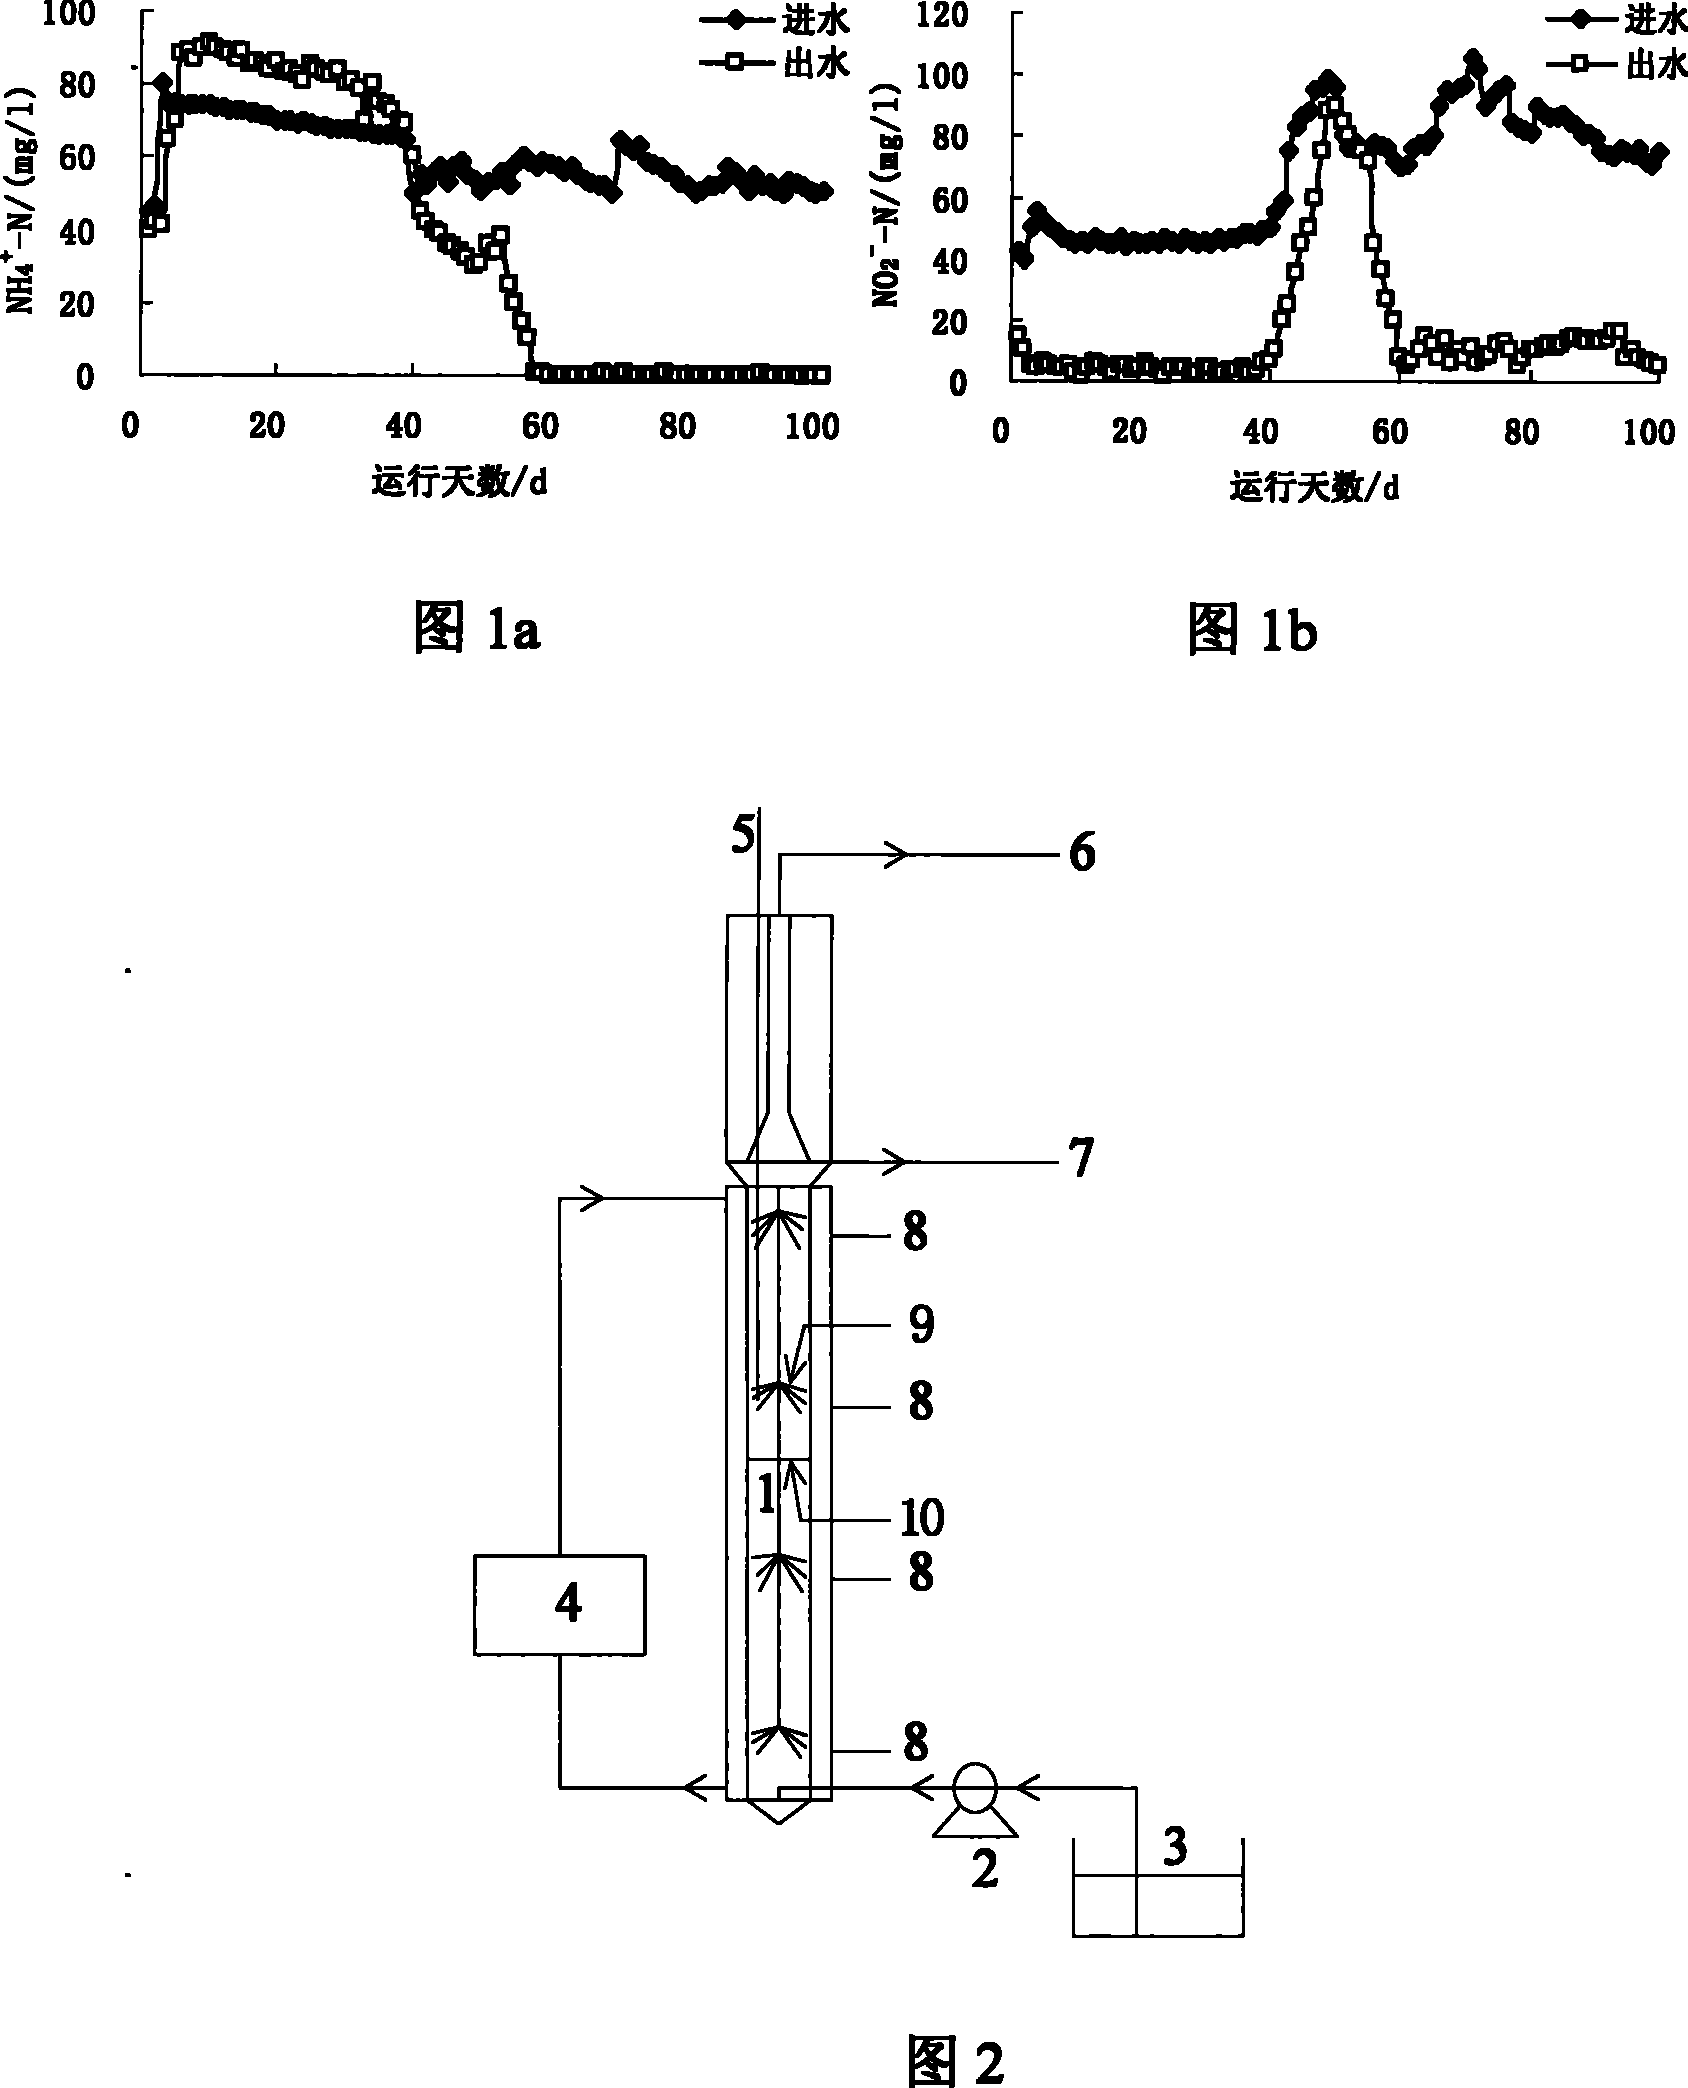 Method for rapidly culturing anaerobic ammonium oxidation bacteria by up-flow type anaerobic sludge bed reactor